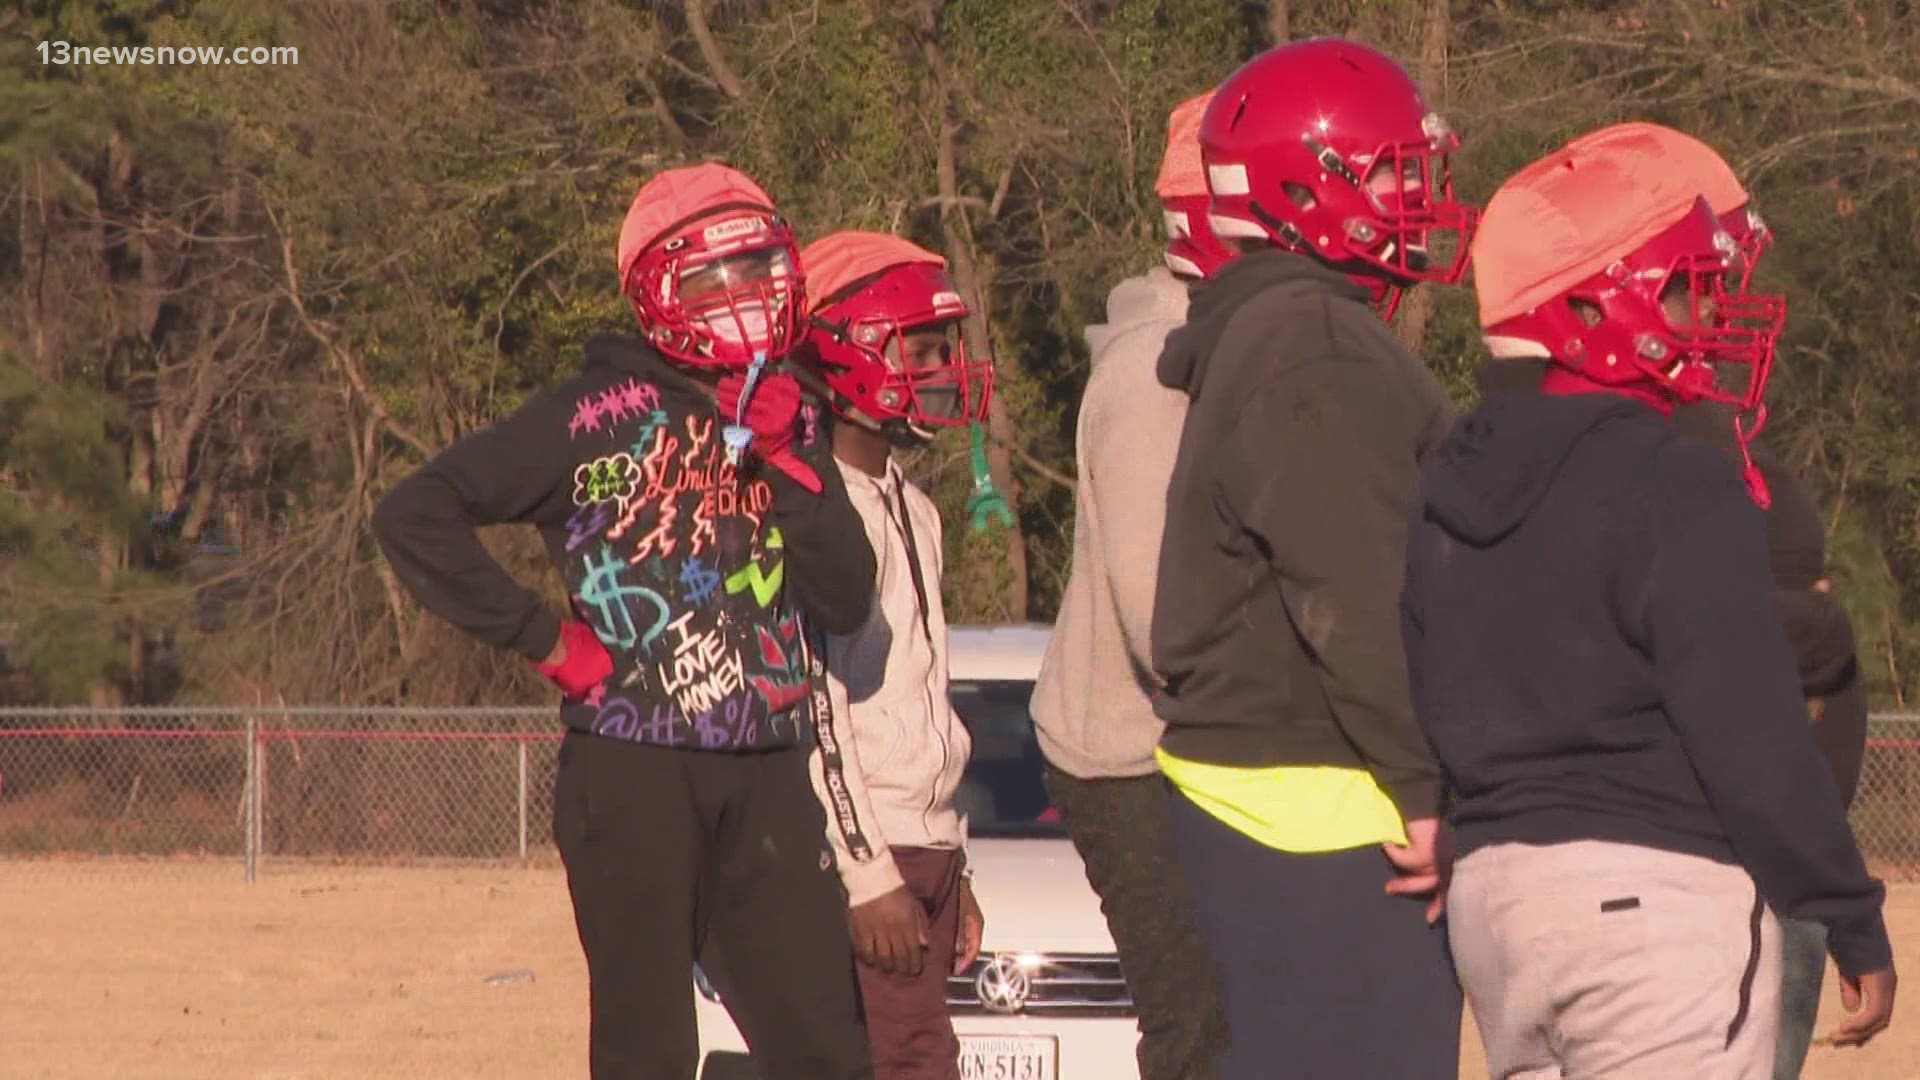 High school athletes in Norfolk Public Schools have traded heat and humidity for cold weather on the first day of football practice.